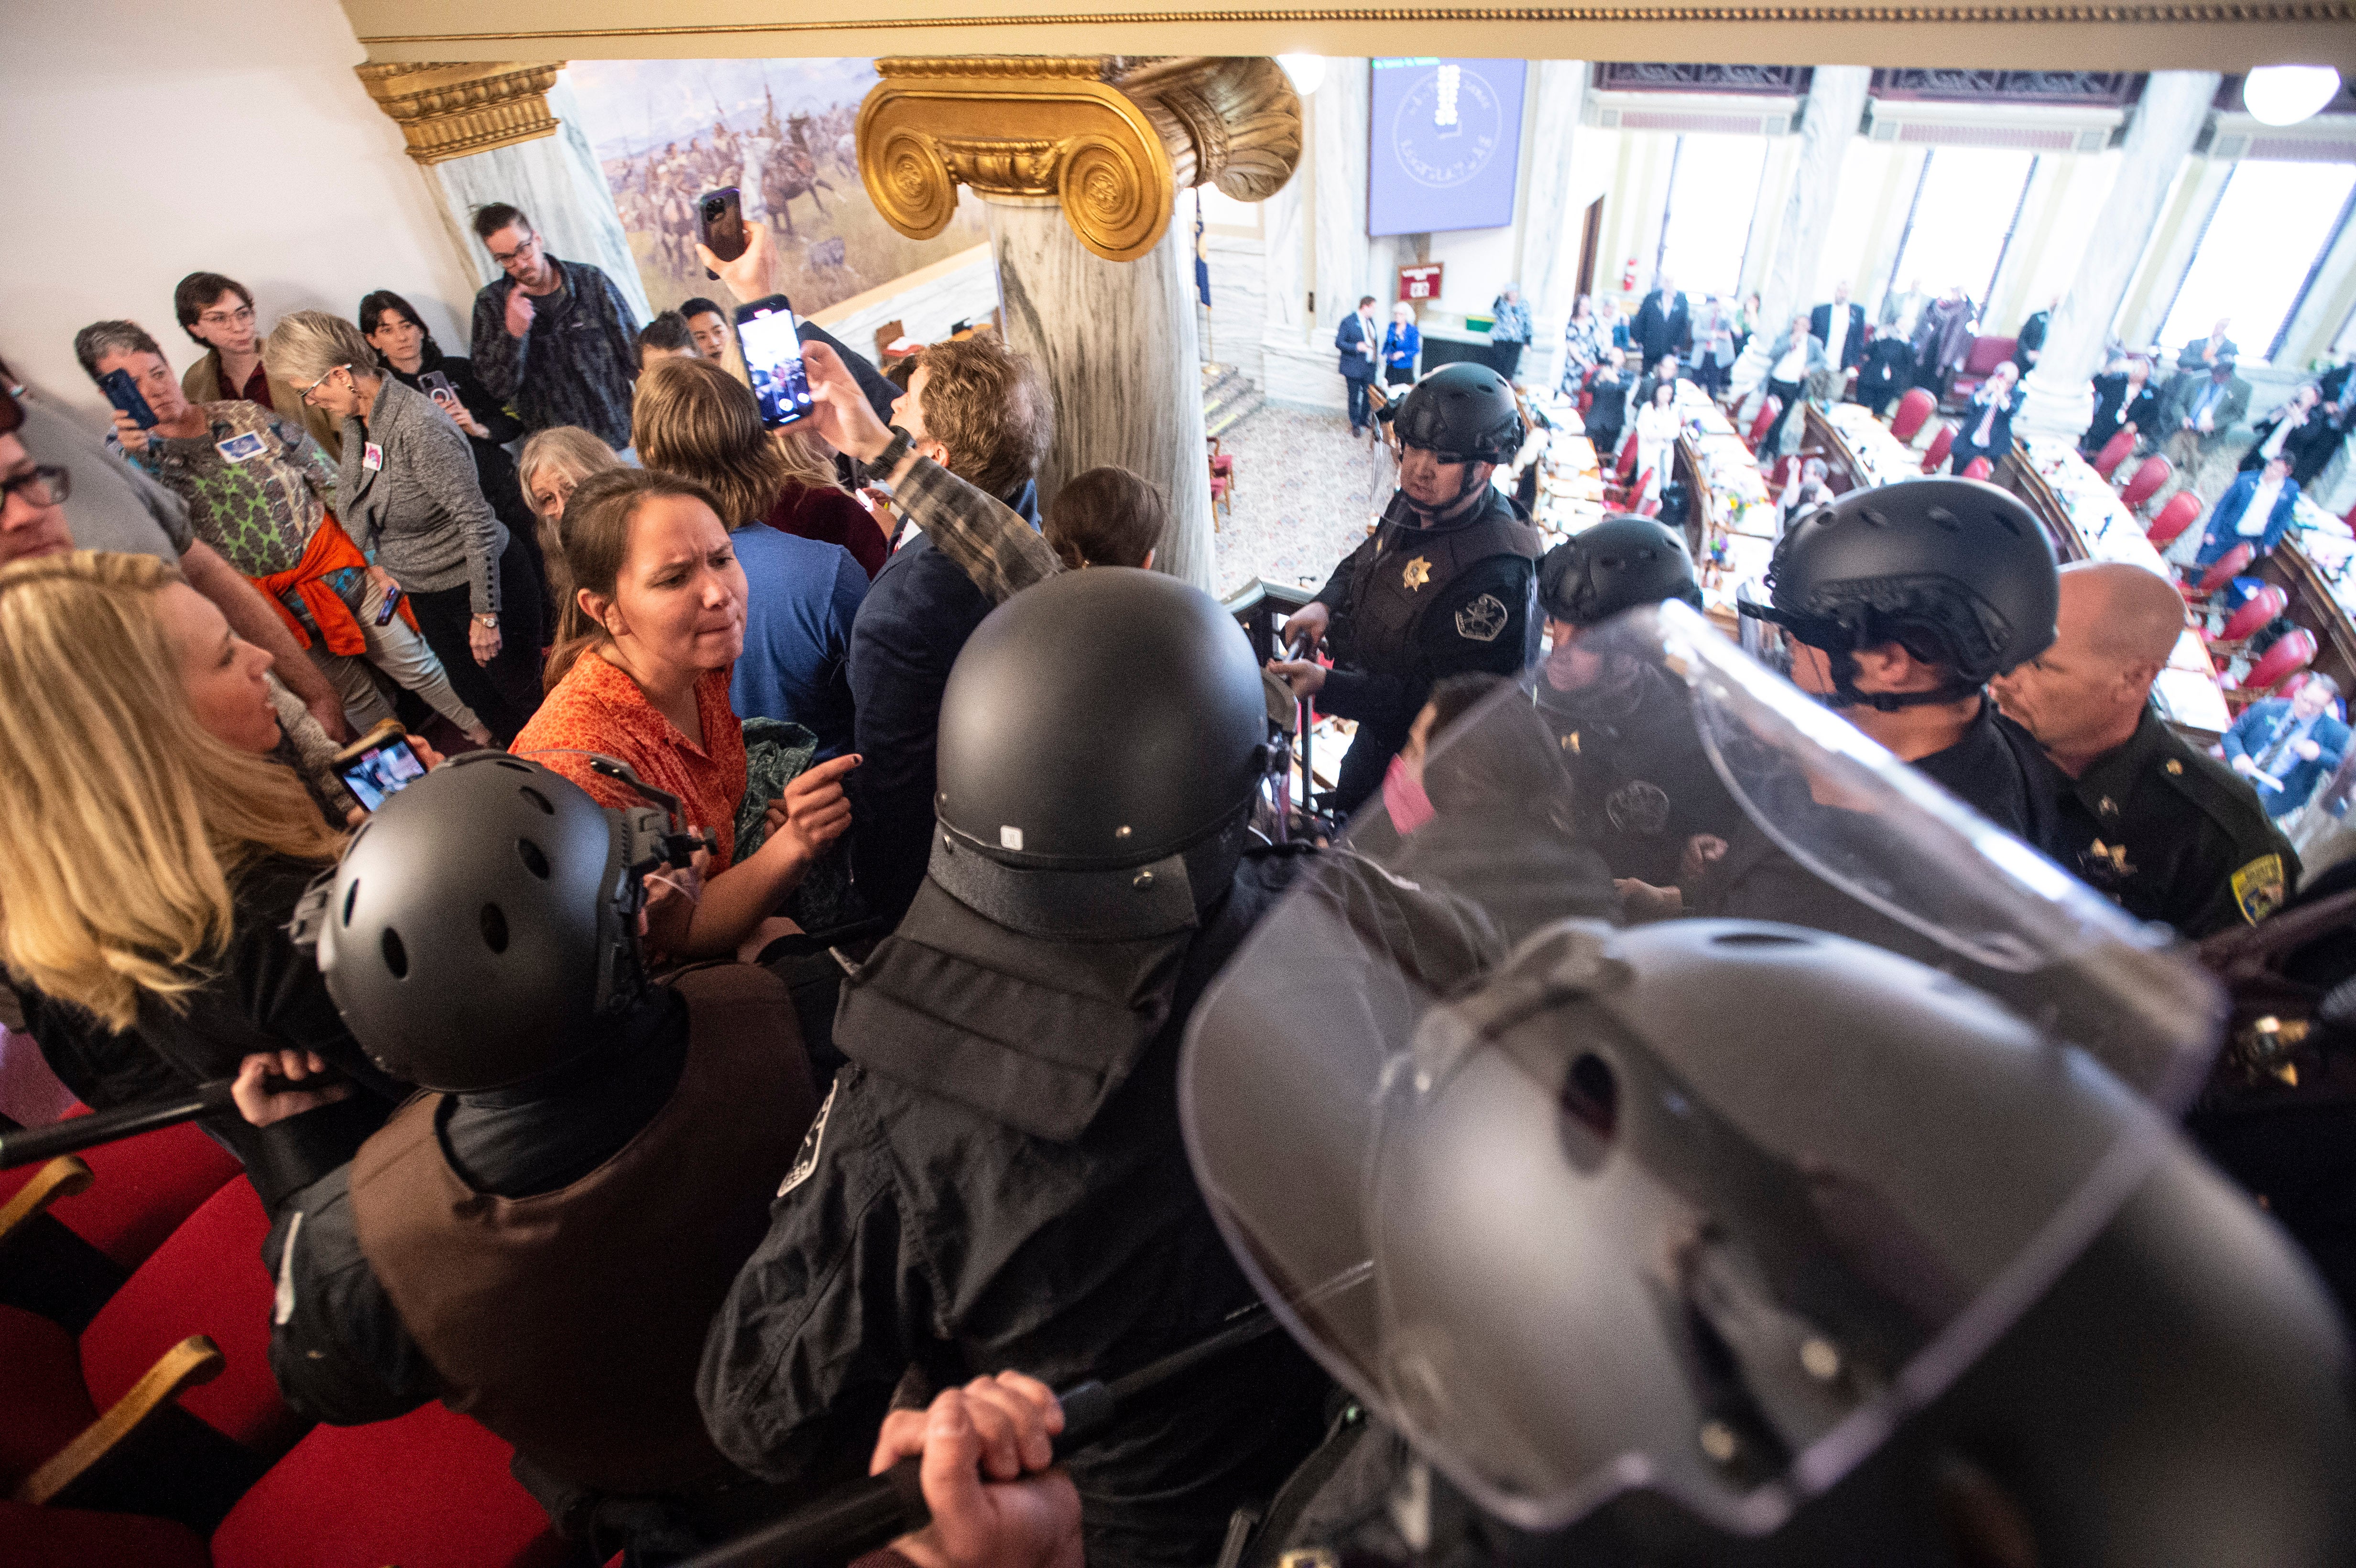 Law enforcement forcibly clear the Montana House of Representatives gallery